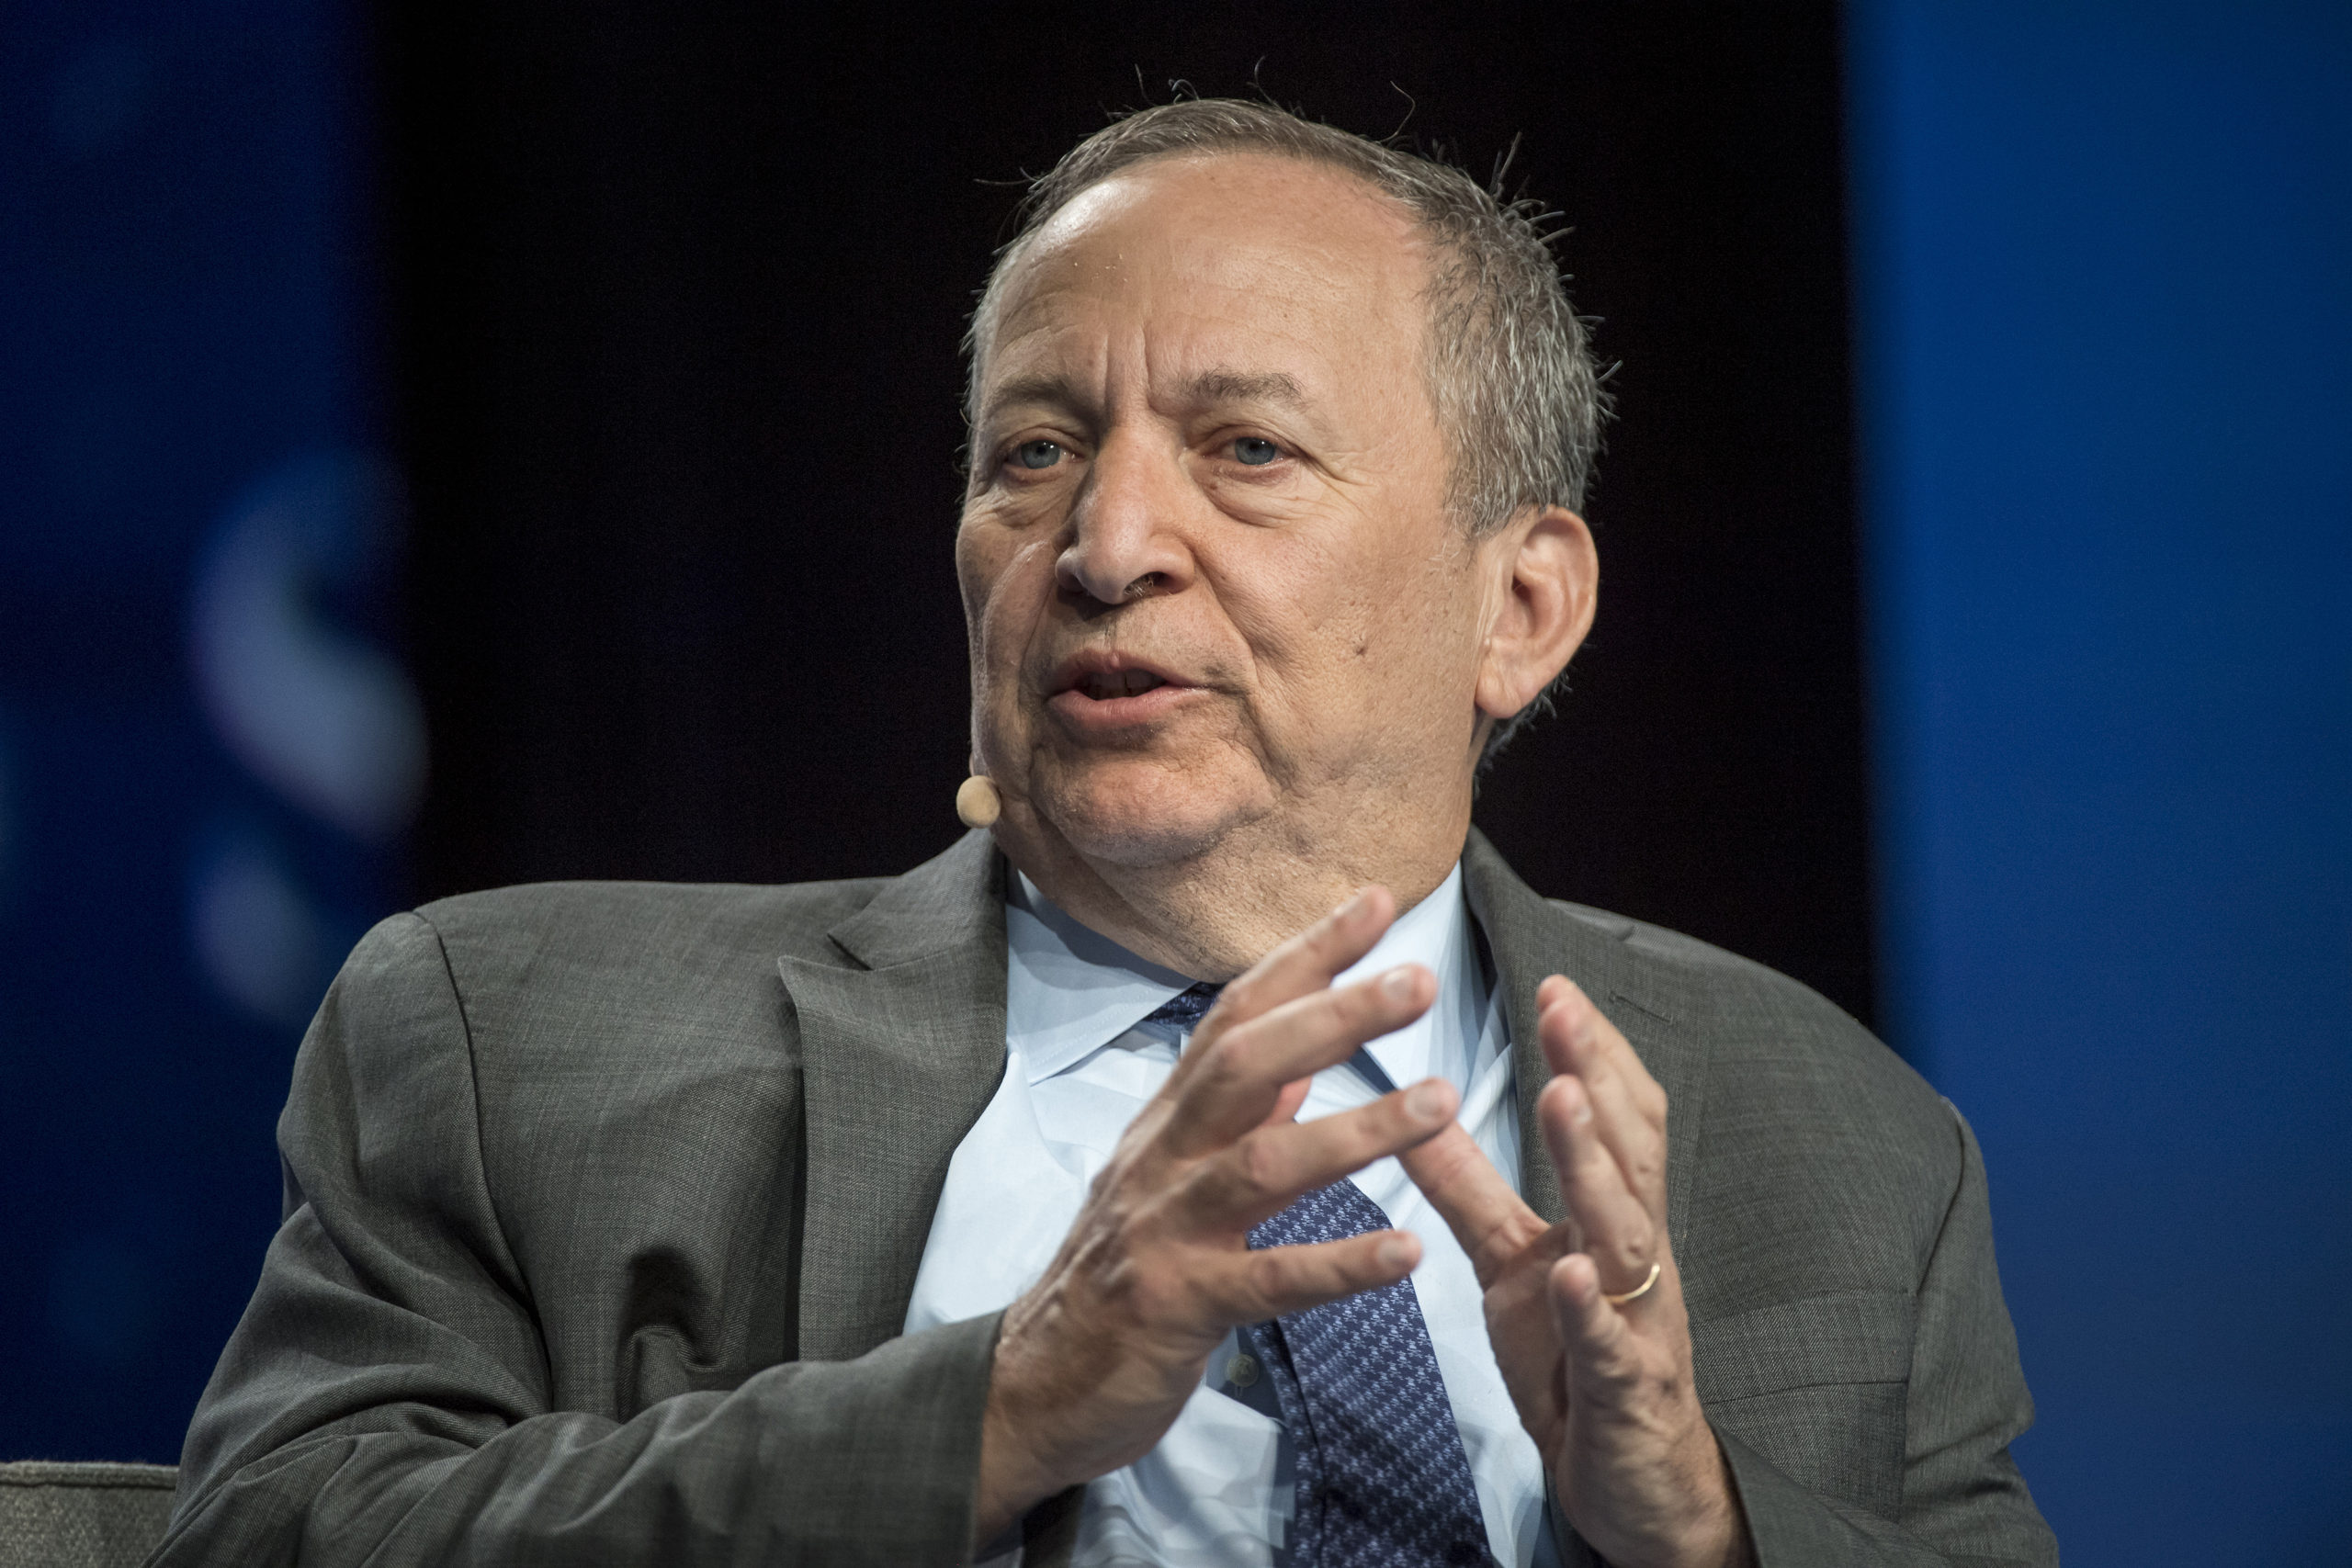 Larry Summers sees likely U.S. recession in next 2 years, says GOP support of Jan. 6 Capitol riot worsens inflation